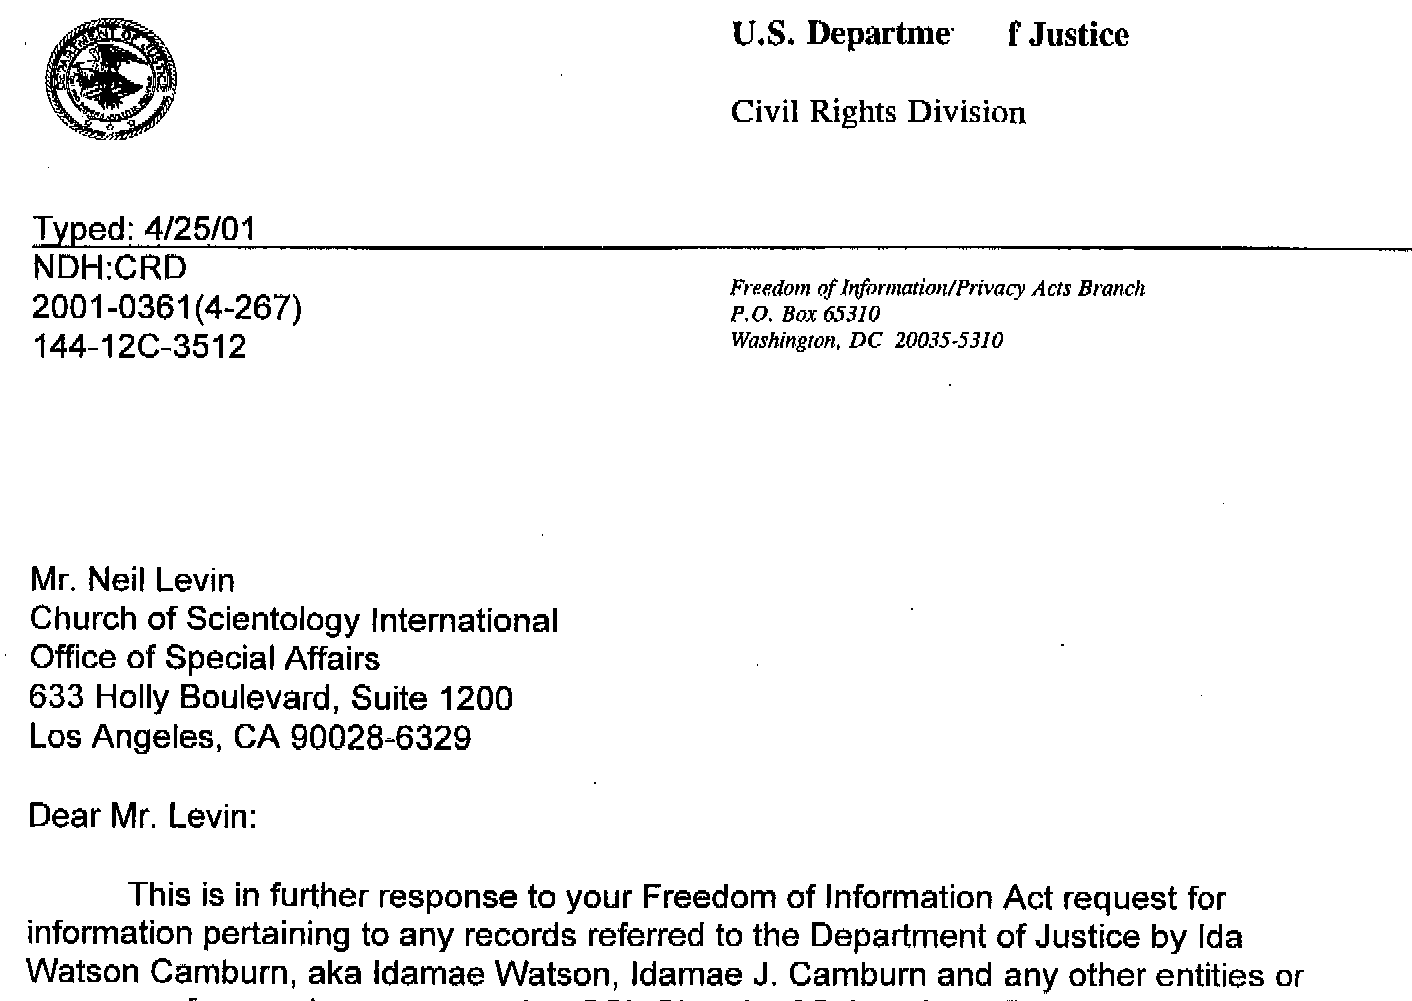 Reply from the DoJ re Scientology's FOIA on Ida Camburn